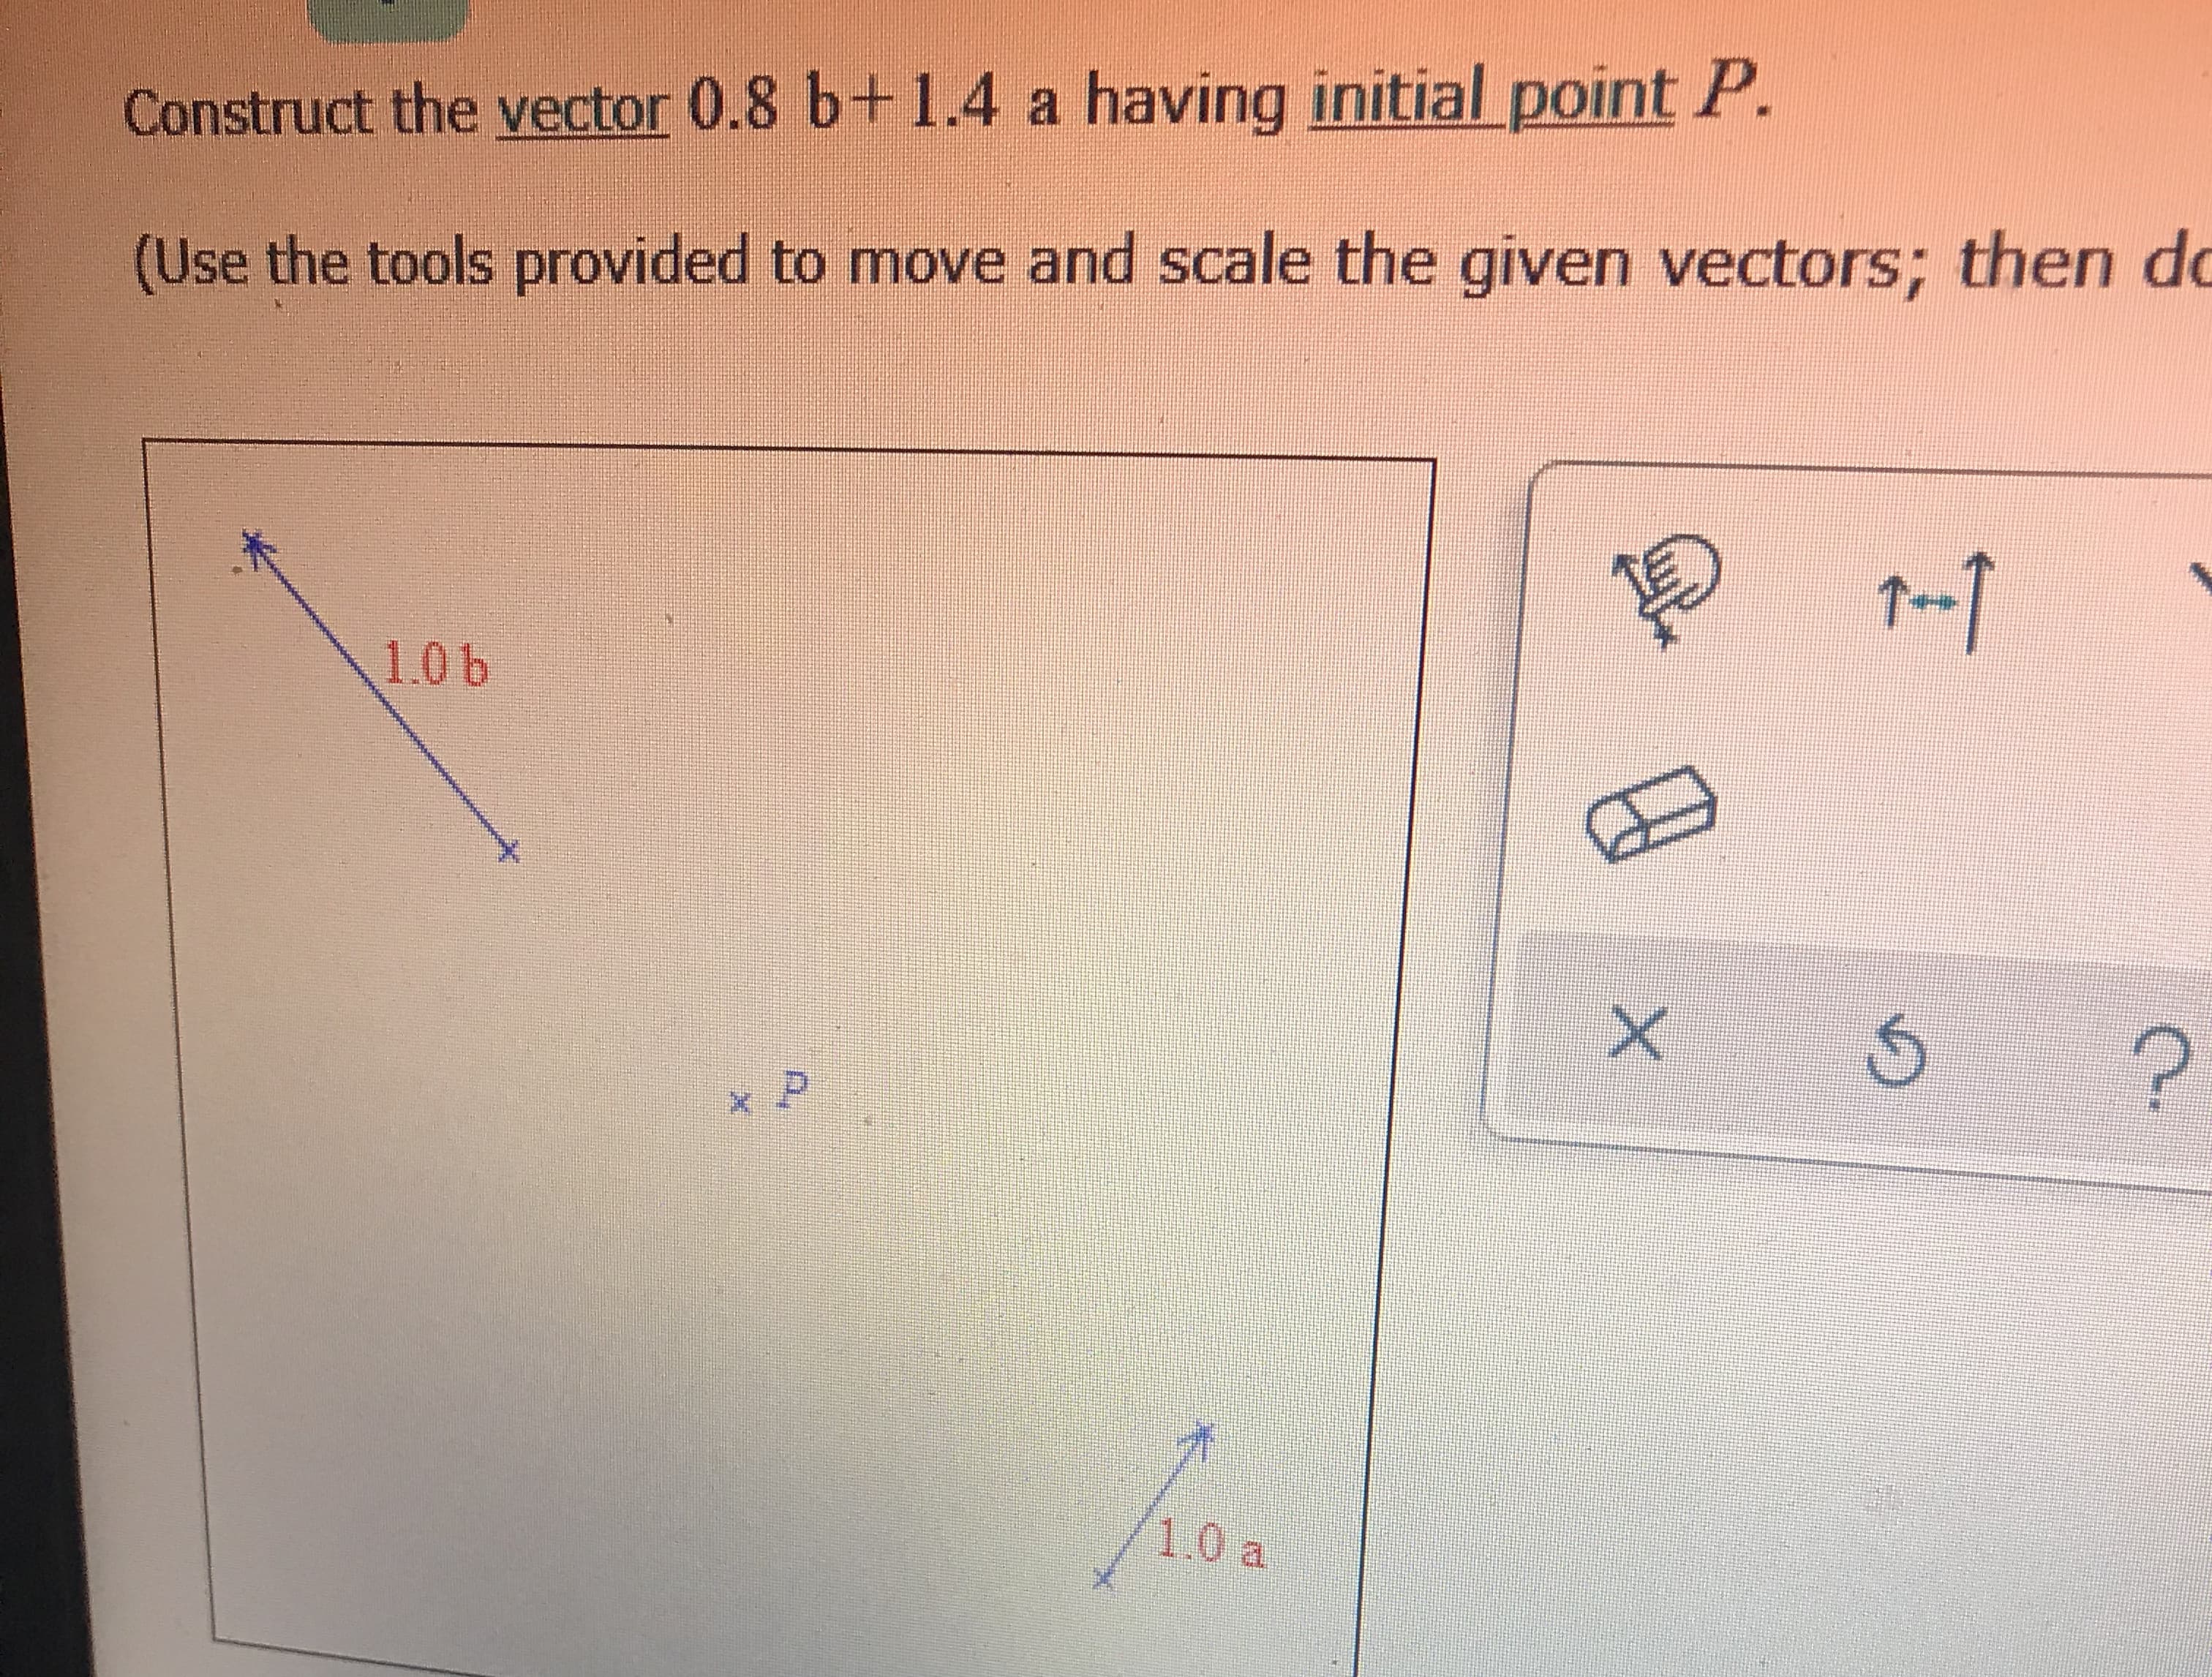 Construct the vector 0.8 b+1.4 a having initial point P.
